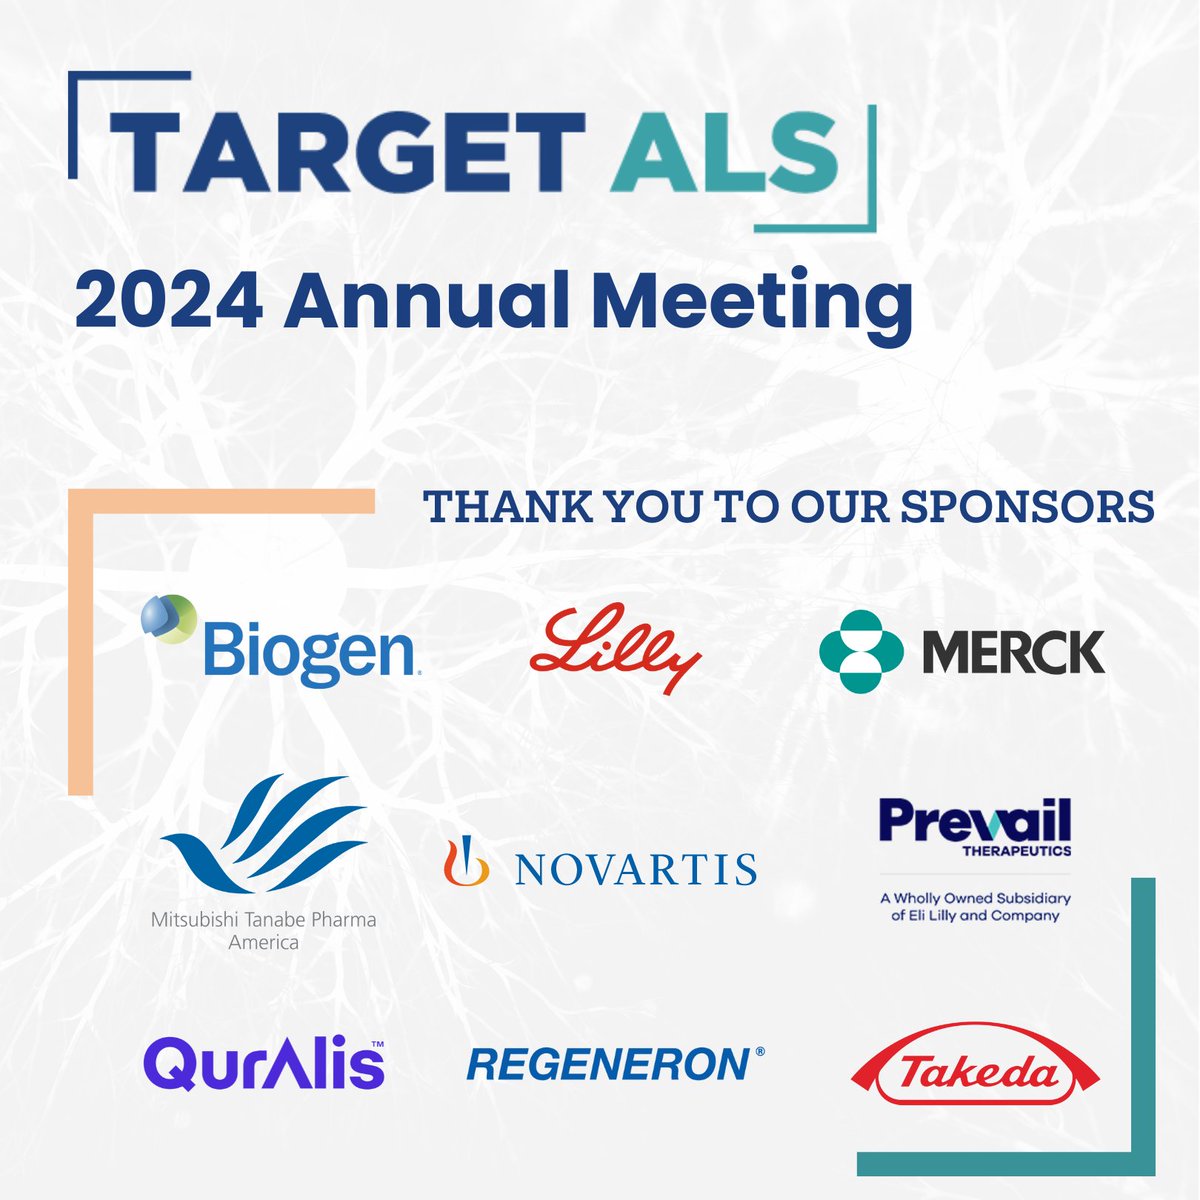 The 2024 Target ALS Annual Meeting will be held next week in #Boston, gathering hundreds from the #ALSresearch community: bit.ly/3JMWmFT #EndALS Thanks to our sponsors: @biogen @Merck Prevail Therapeutics @QurAlisCo Takeda @MTPA_US @EliLillyandCo @Regeneron @Novartis